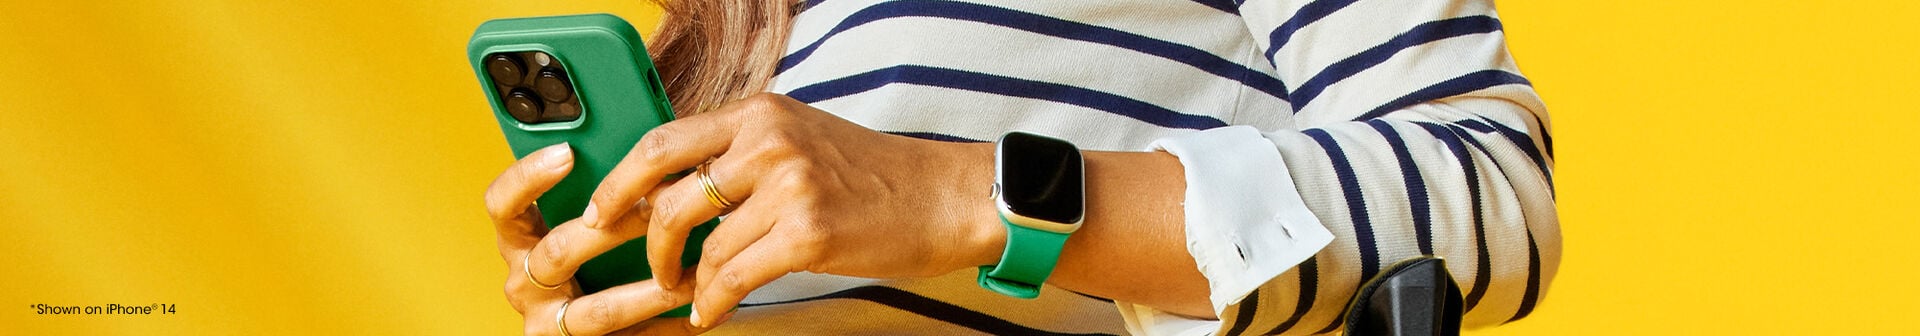 Woman holding an iPhone with a green phone case matching the green watch band on her Apple Watch she is wearing.